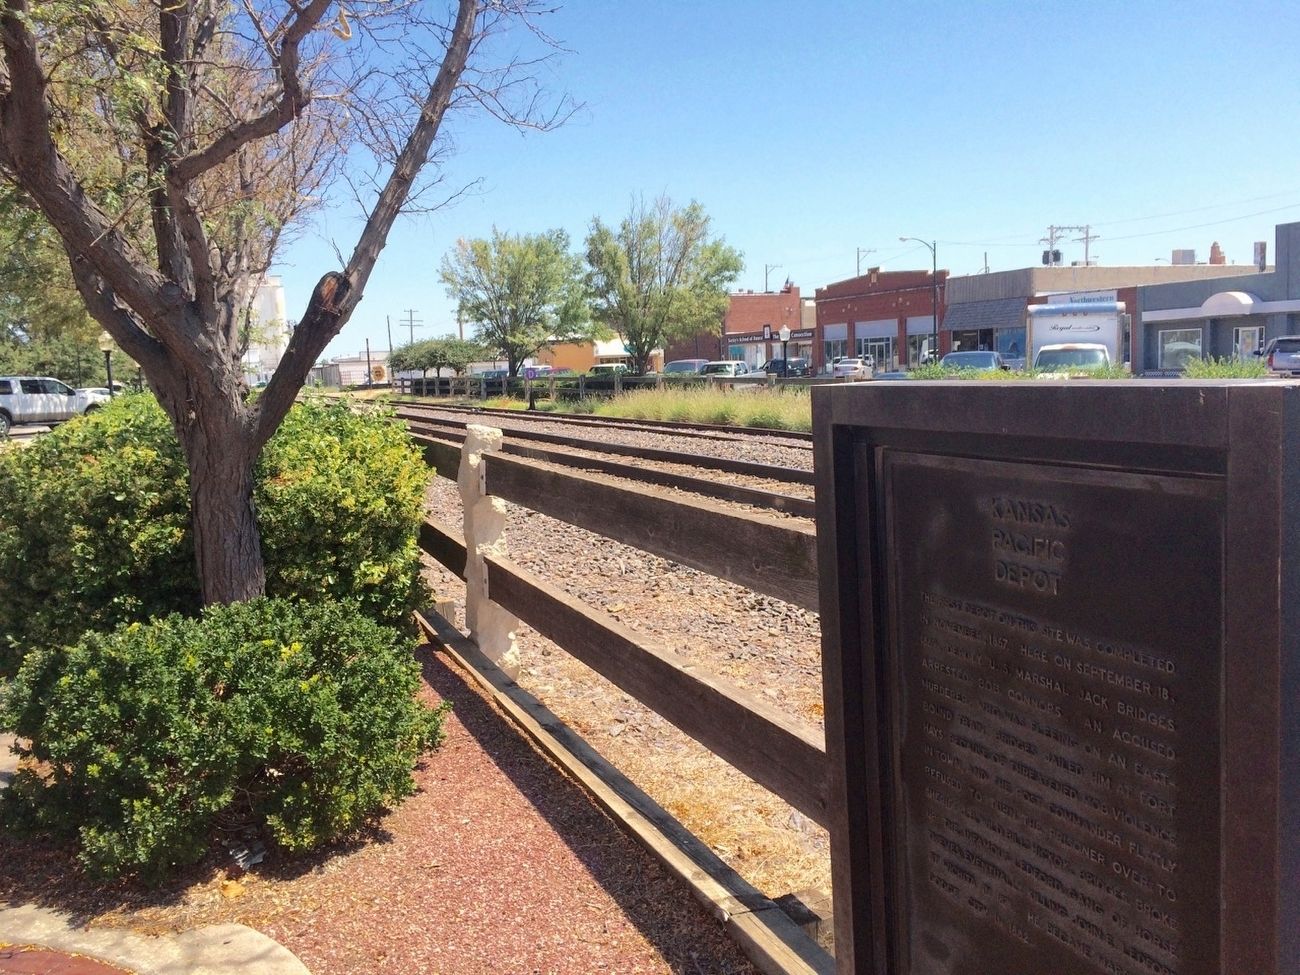 Kansas Pacific Depot Marker in front of train tracks in Union Pacific Plaza. image. Click for full size.